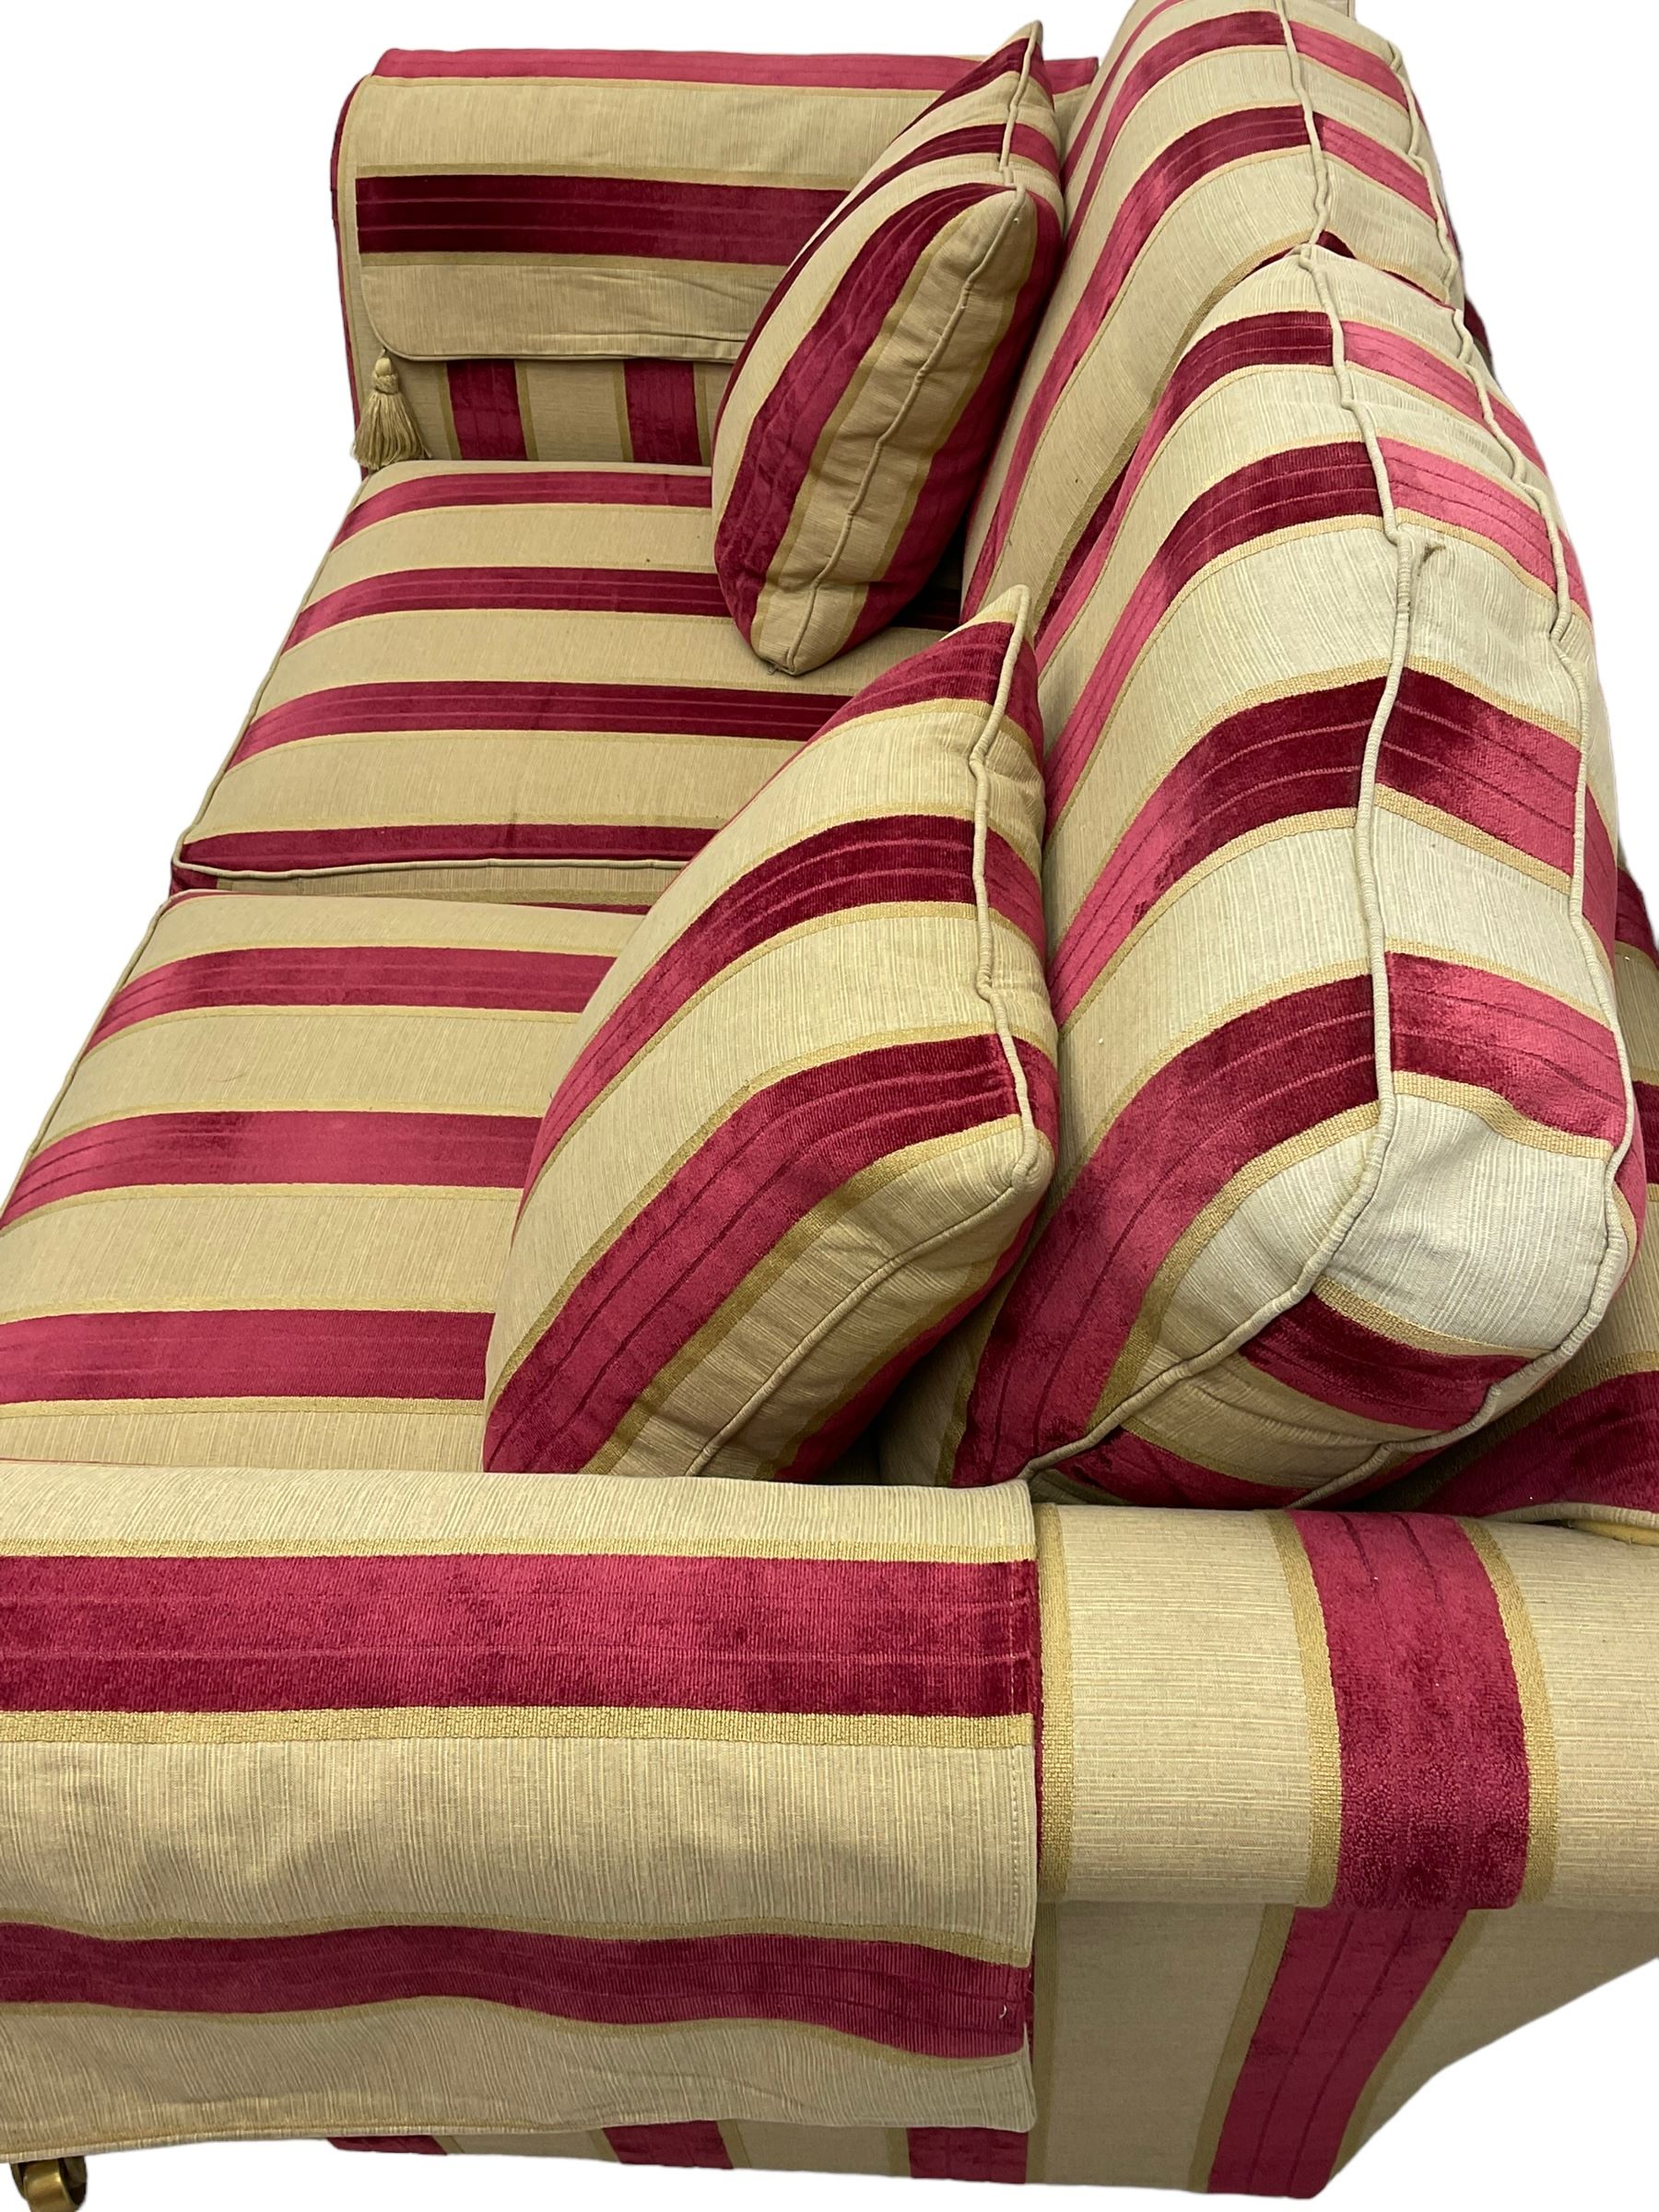 Three-piece lounge suite - large two-seat sofa upholstered in red and gold striped fabric (W185cm - Image 22 of 24